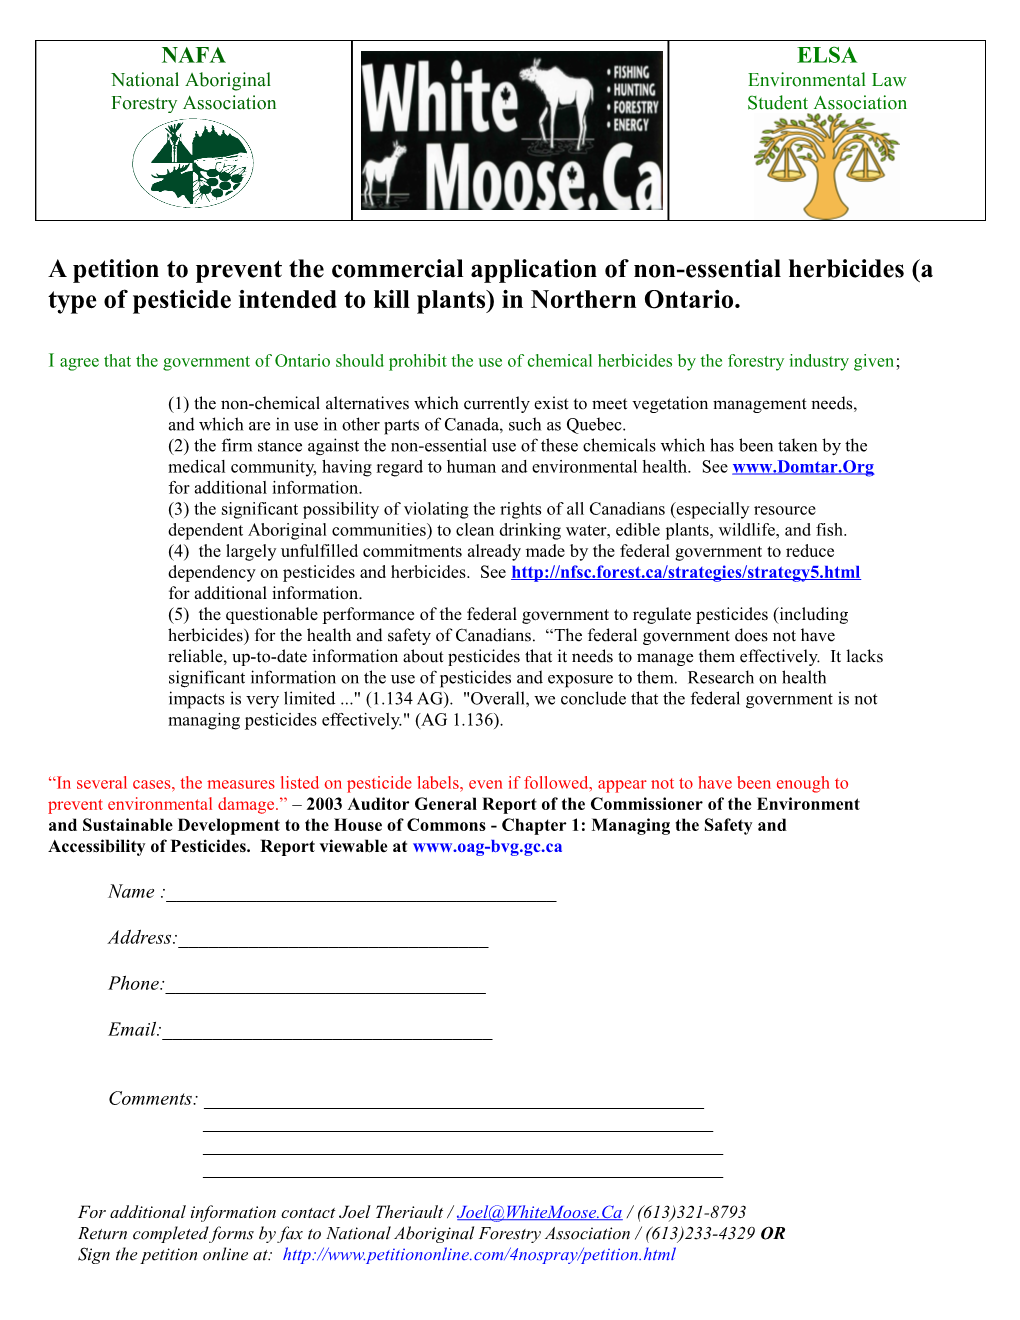 A Petition to Prevent the Commercial Application of Non-Essential Herbicides (A Type Of